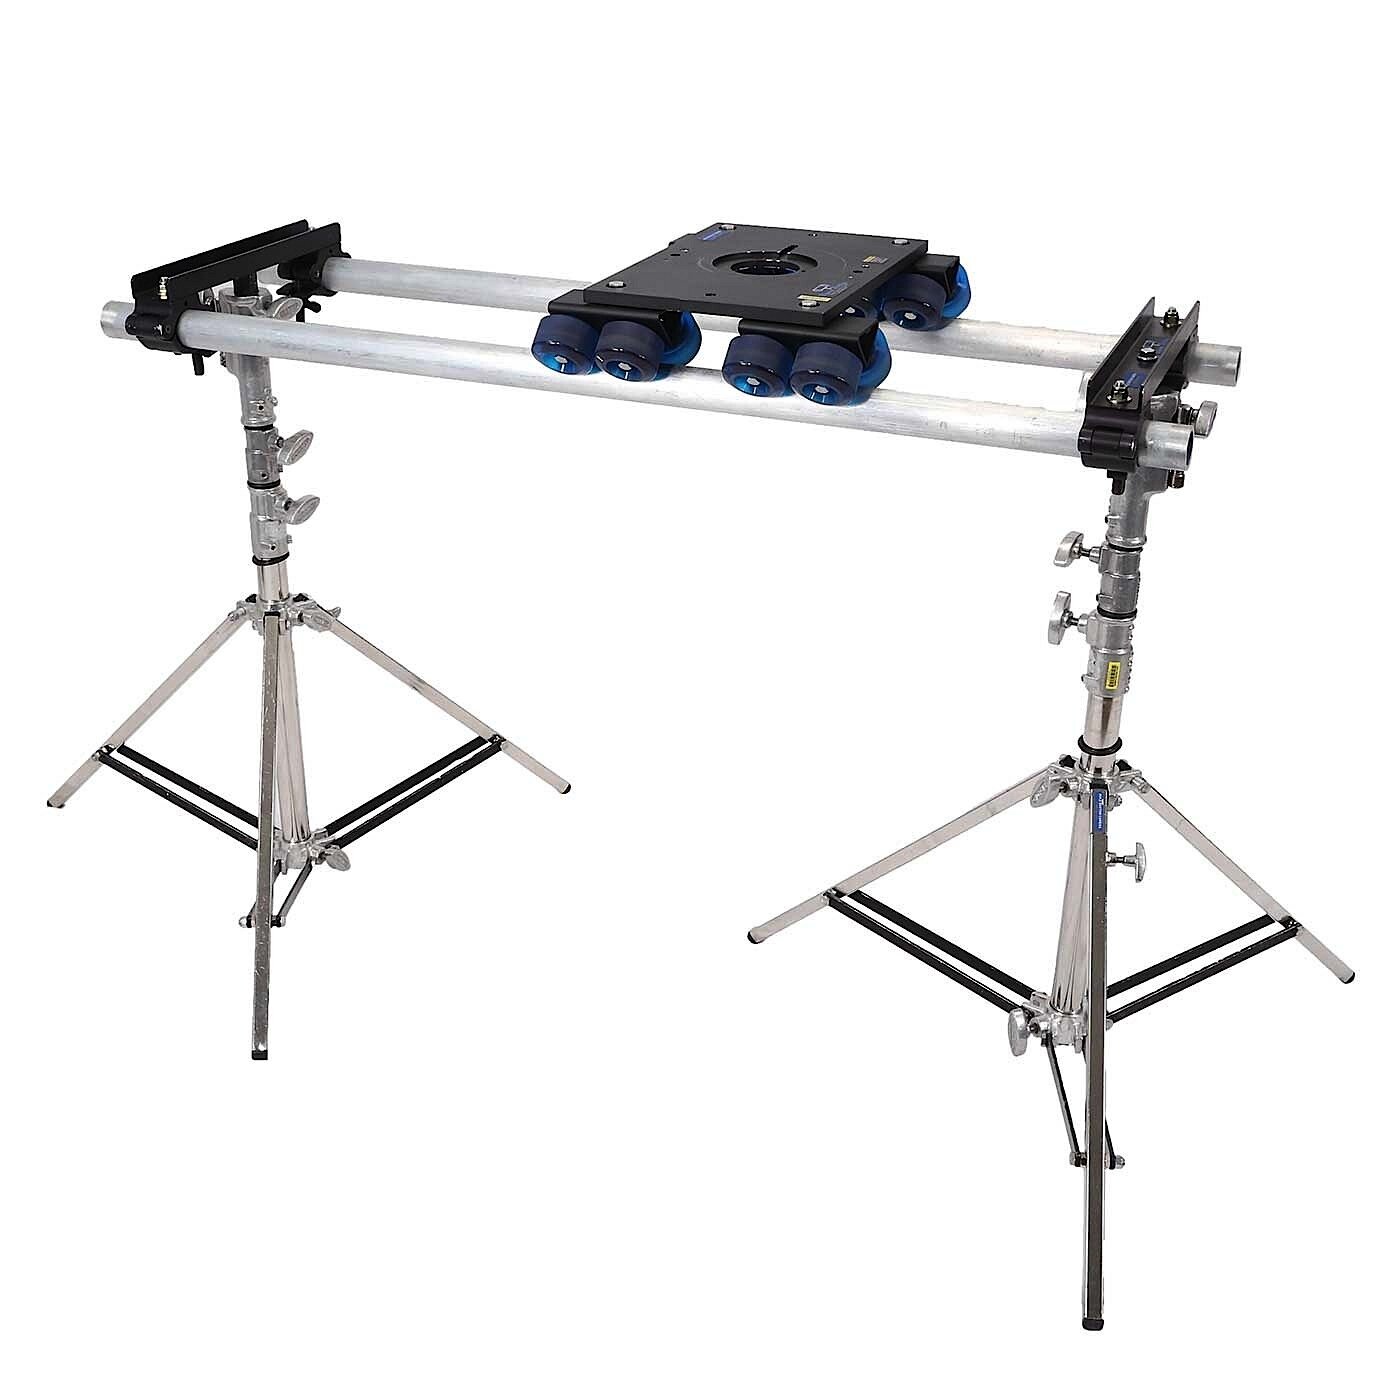 Dana Dolly Portable Dolly System Rental Kit with Universal Track Ends f.jpg